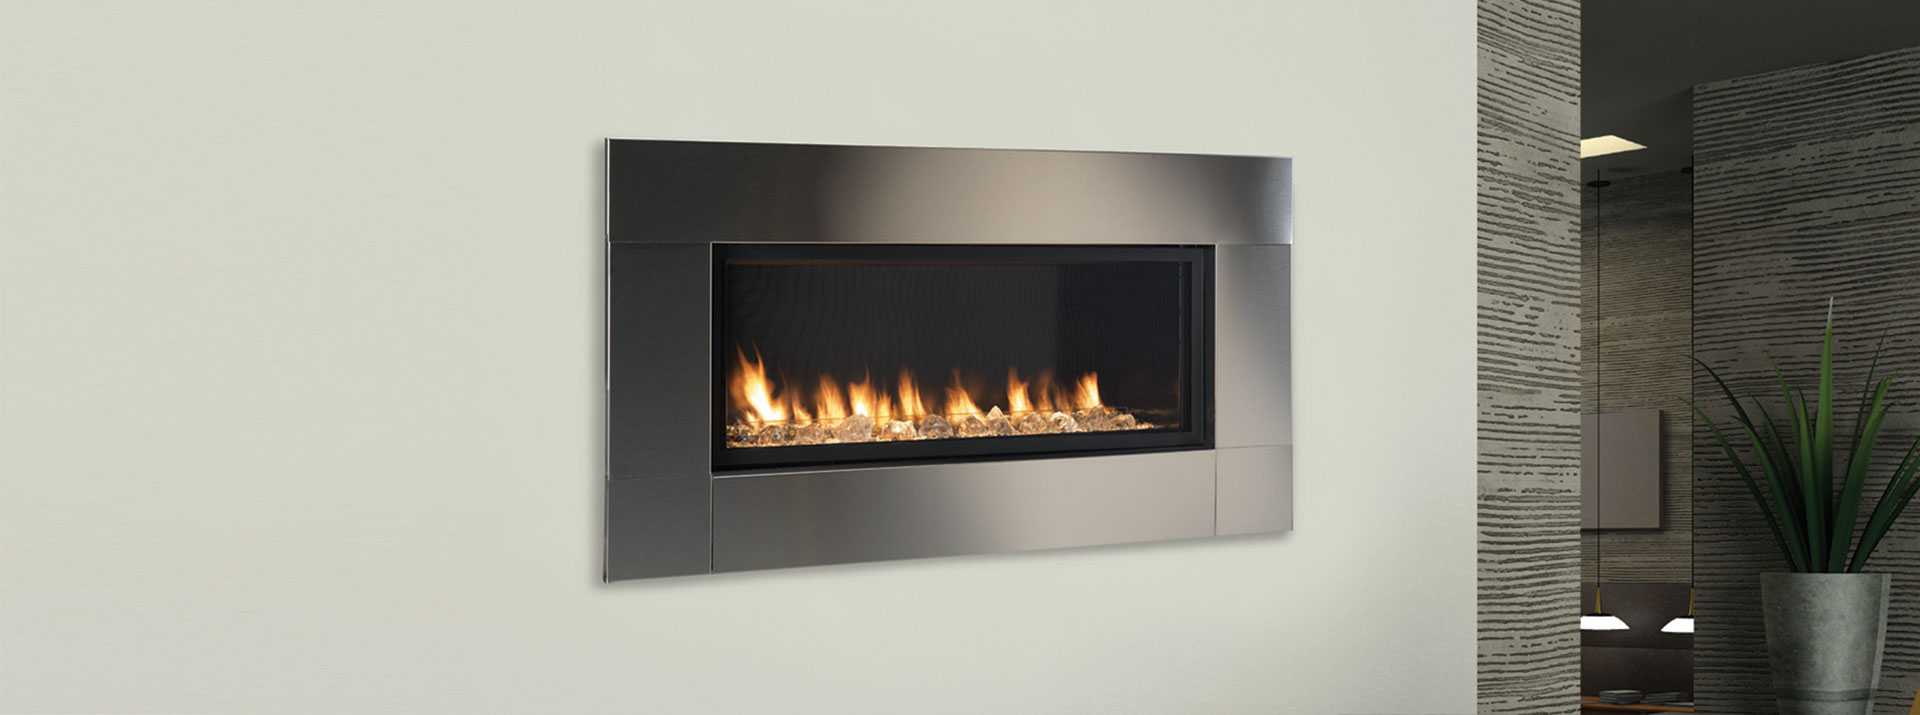 Propane Fireplace Logs Ventless New Vent Free Showroom